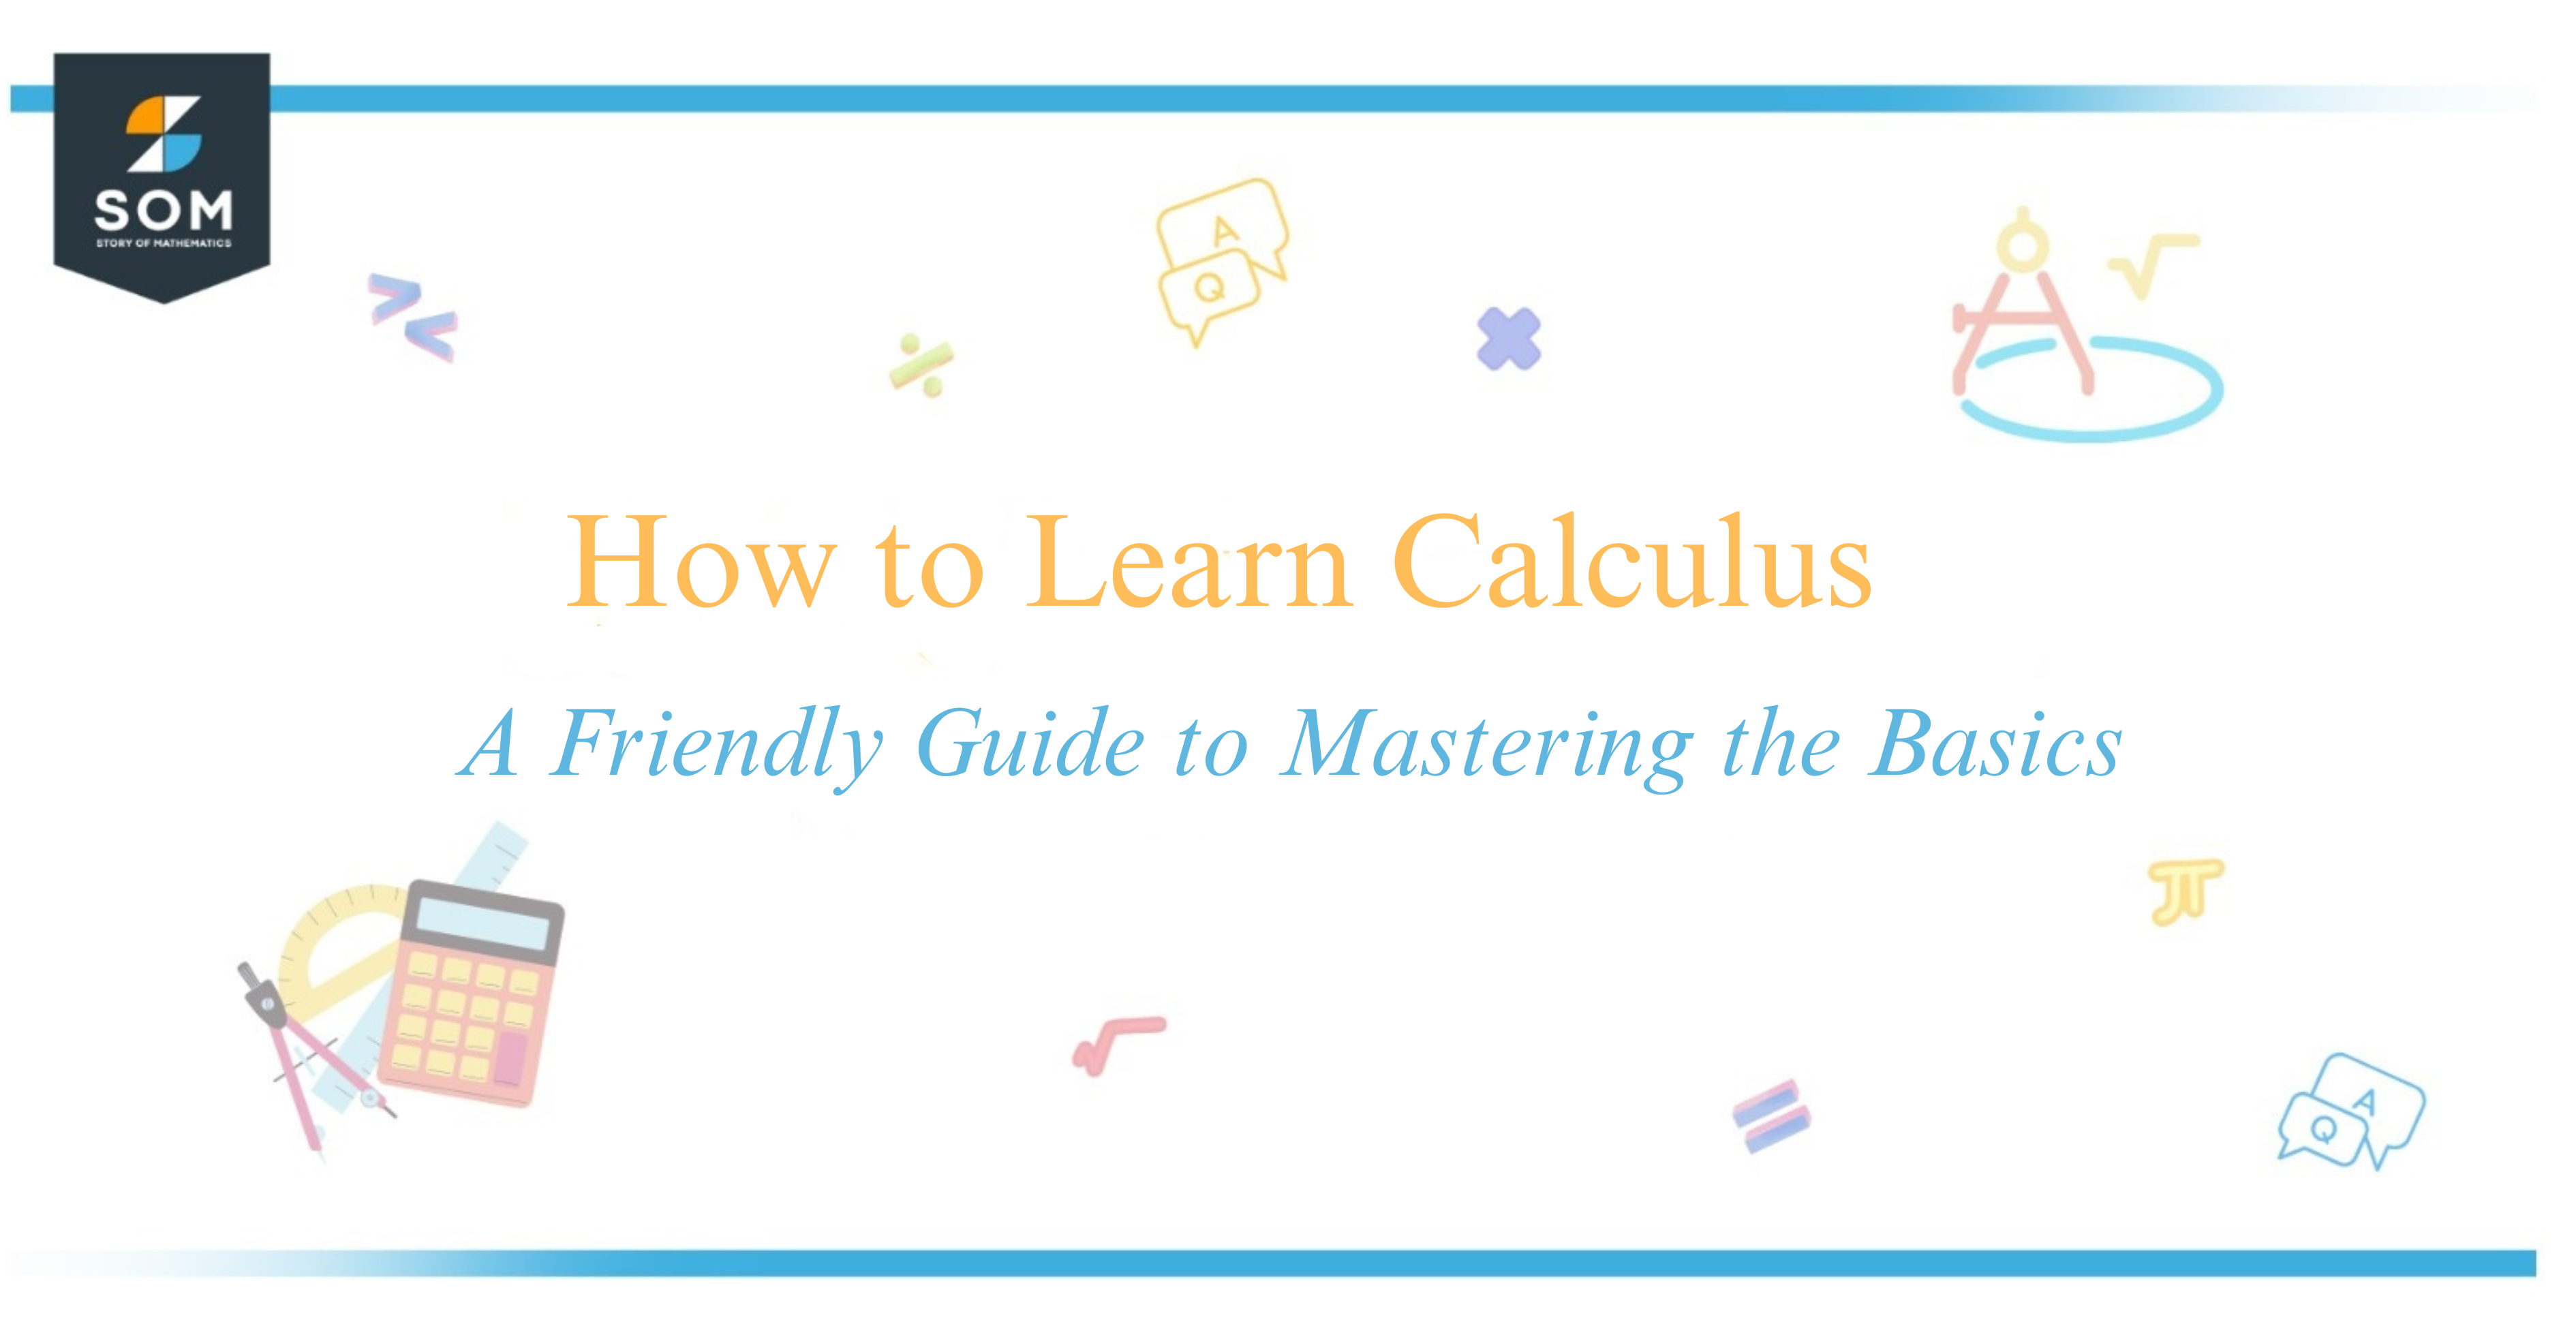 How to Learn Calculus A Friendly Guide to Mastering the Basics